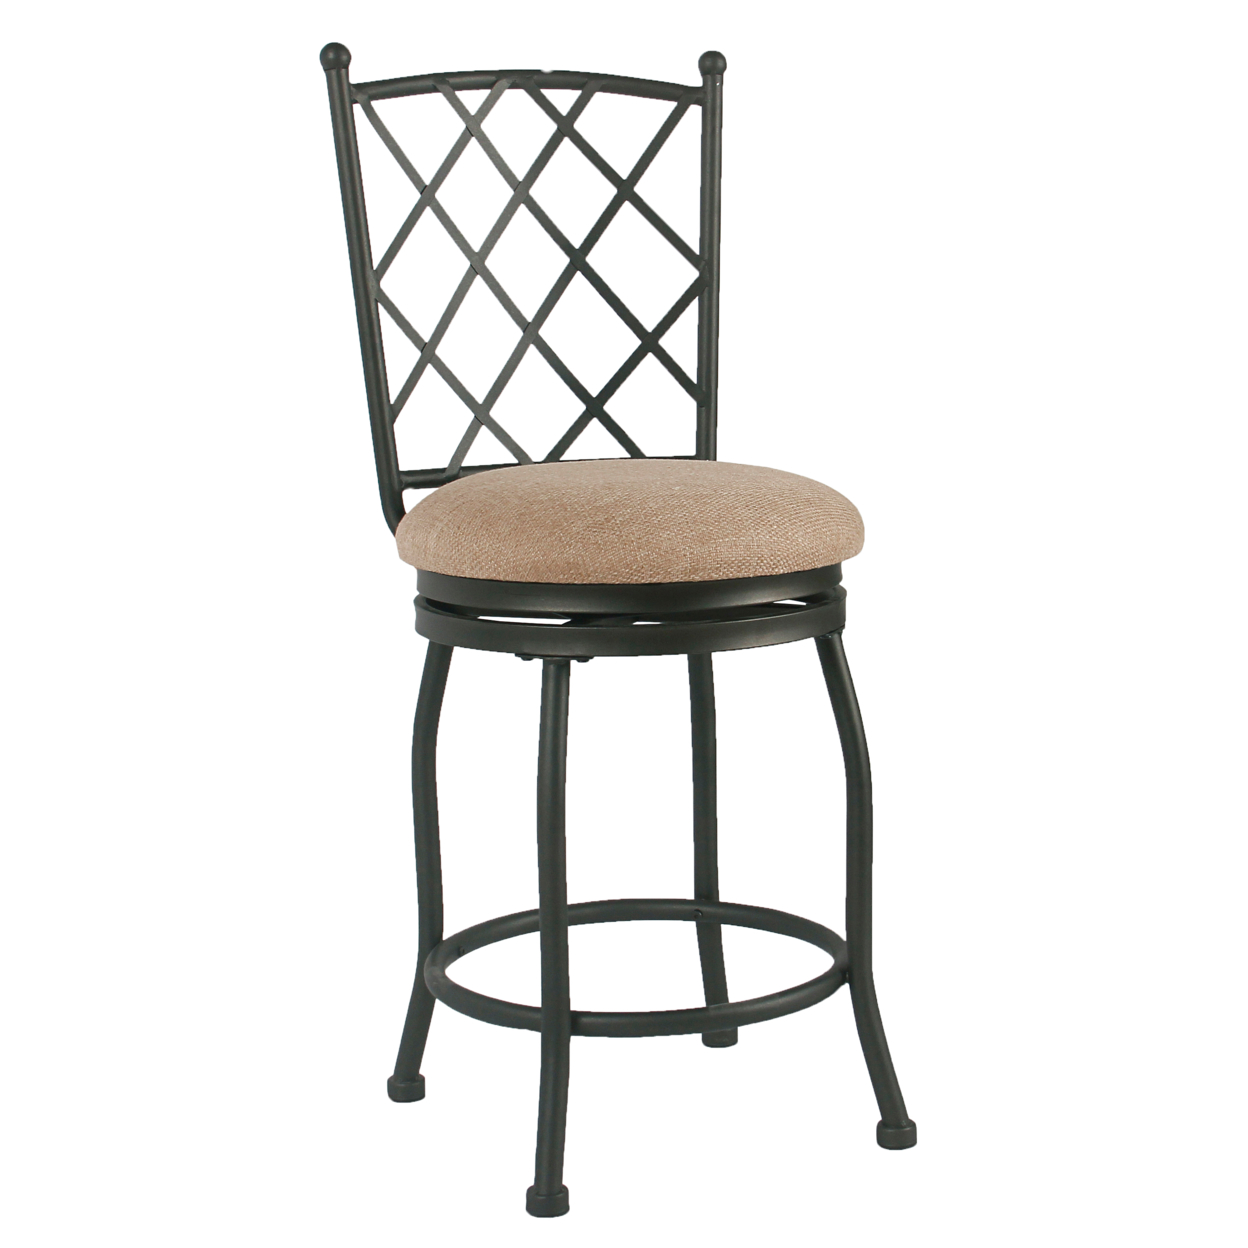 Metal Framed Counter Stool With Fabric Upholstered Seat And Designer Back, Beige And Black- Saltoro Sherpi